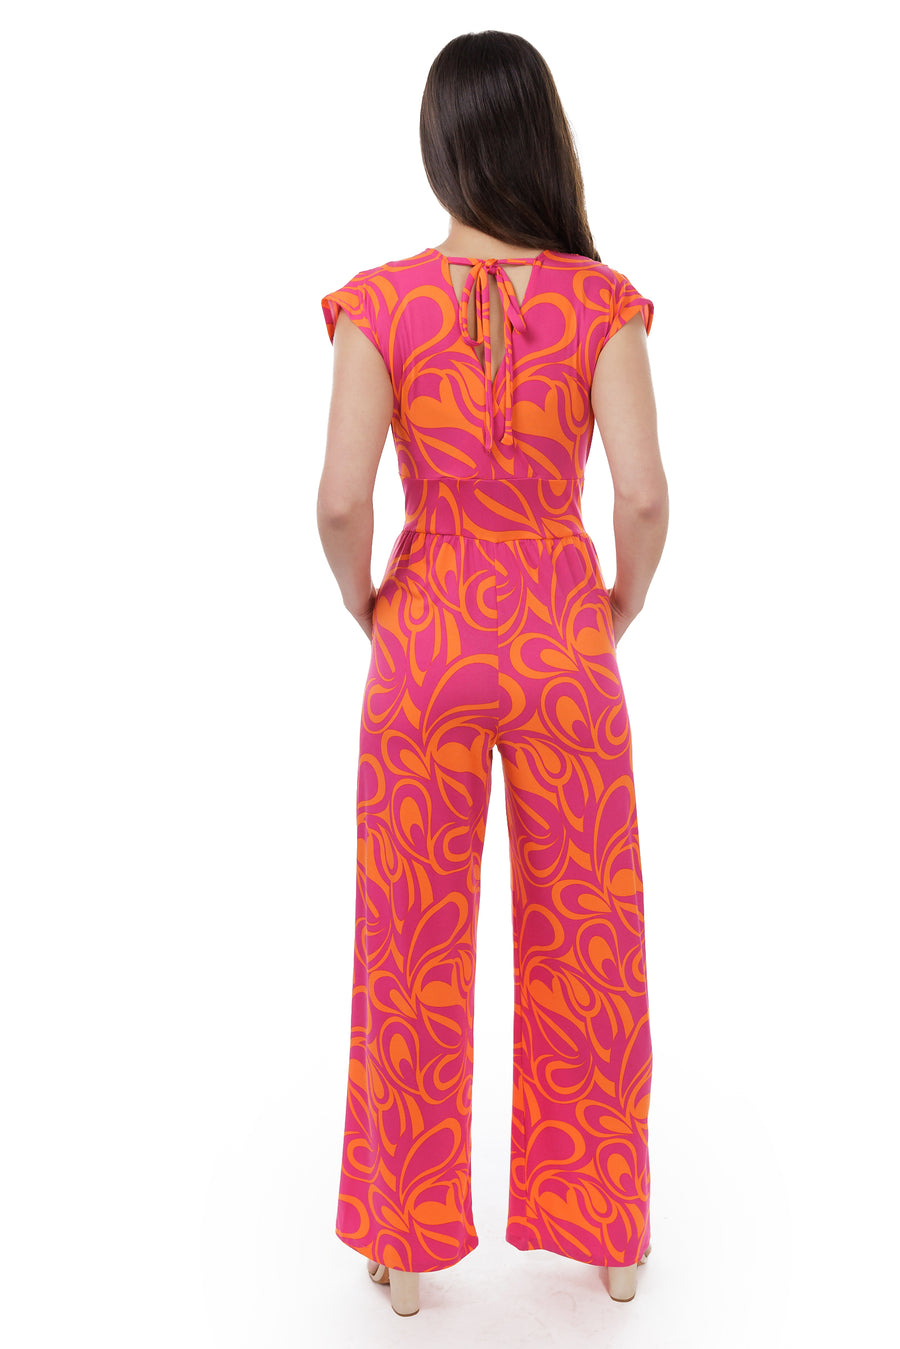 Psychedelic Creamsicle Veronica Lake Jumpsuit